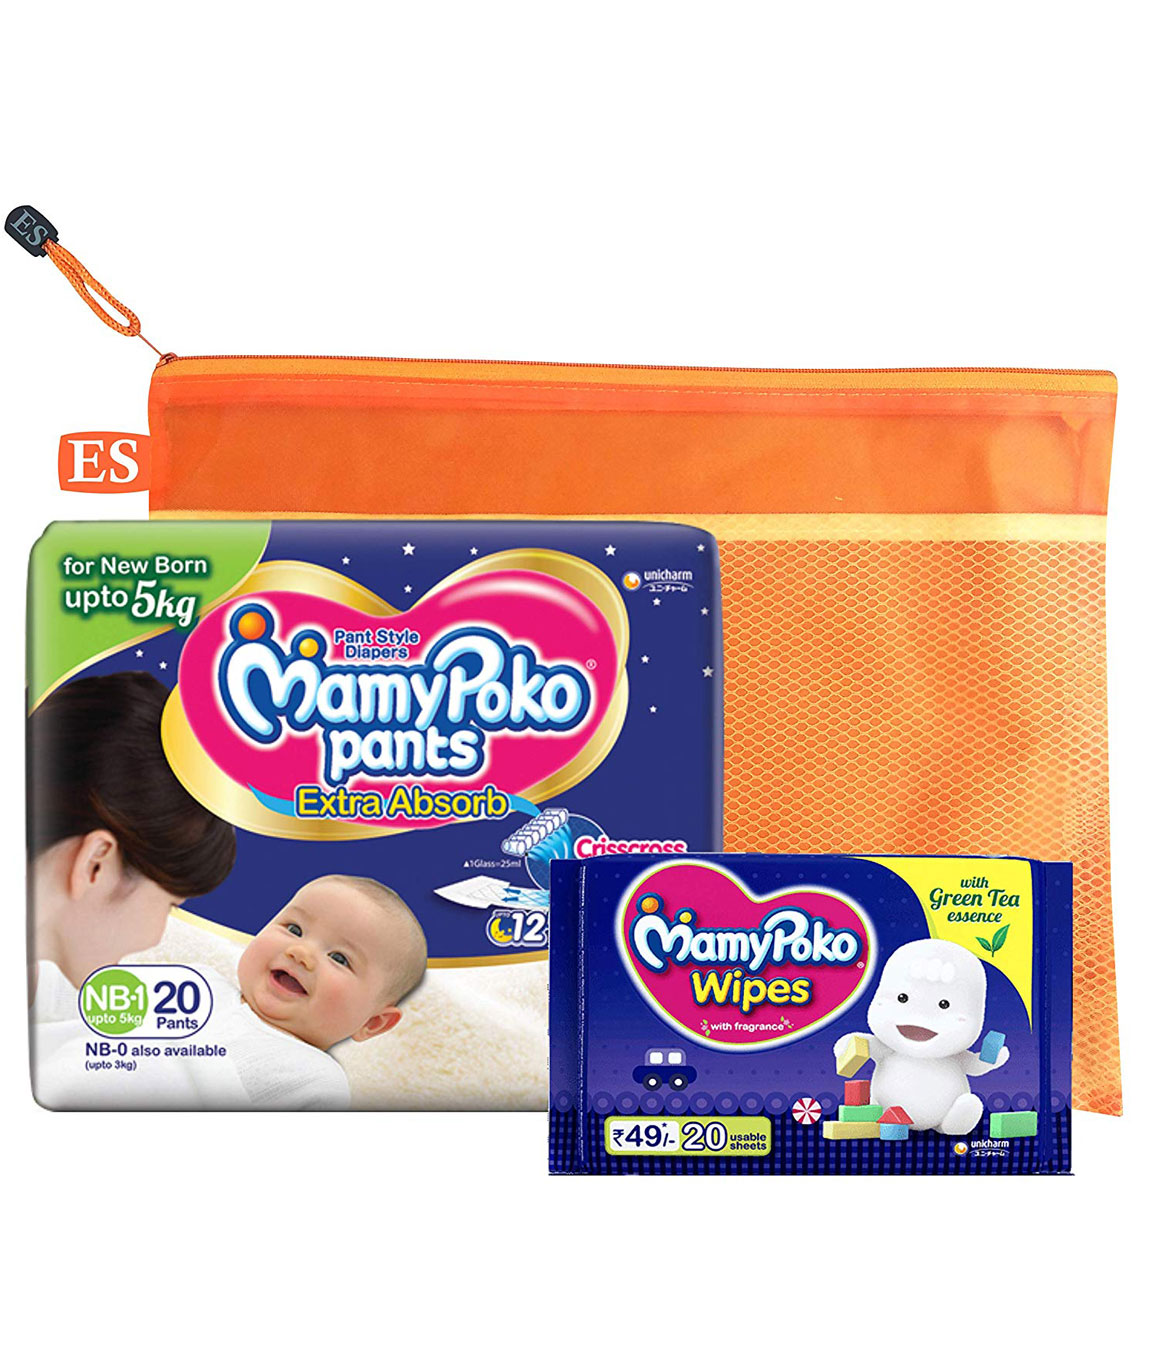 Mamy Poko Pants Standard Pant Diapers (S, 1 Pieces, Pack of 1) (Set Of 20)  (MRP 9.00 Rs) | Udaan - B2B Buying for Retailers